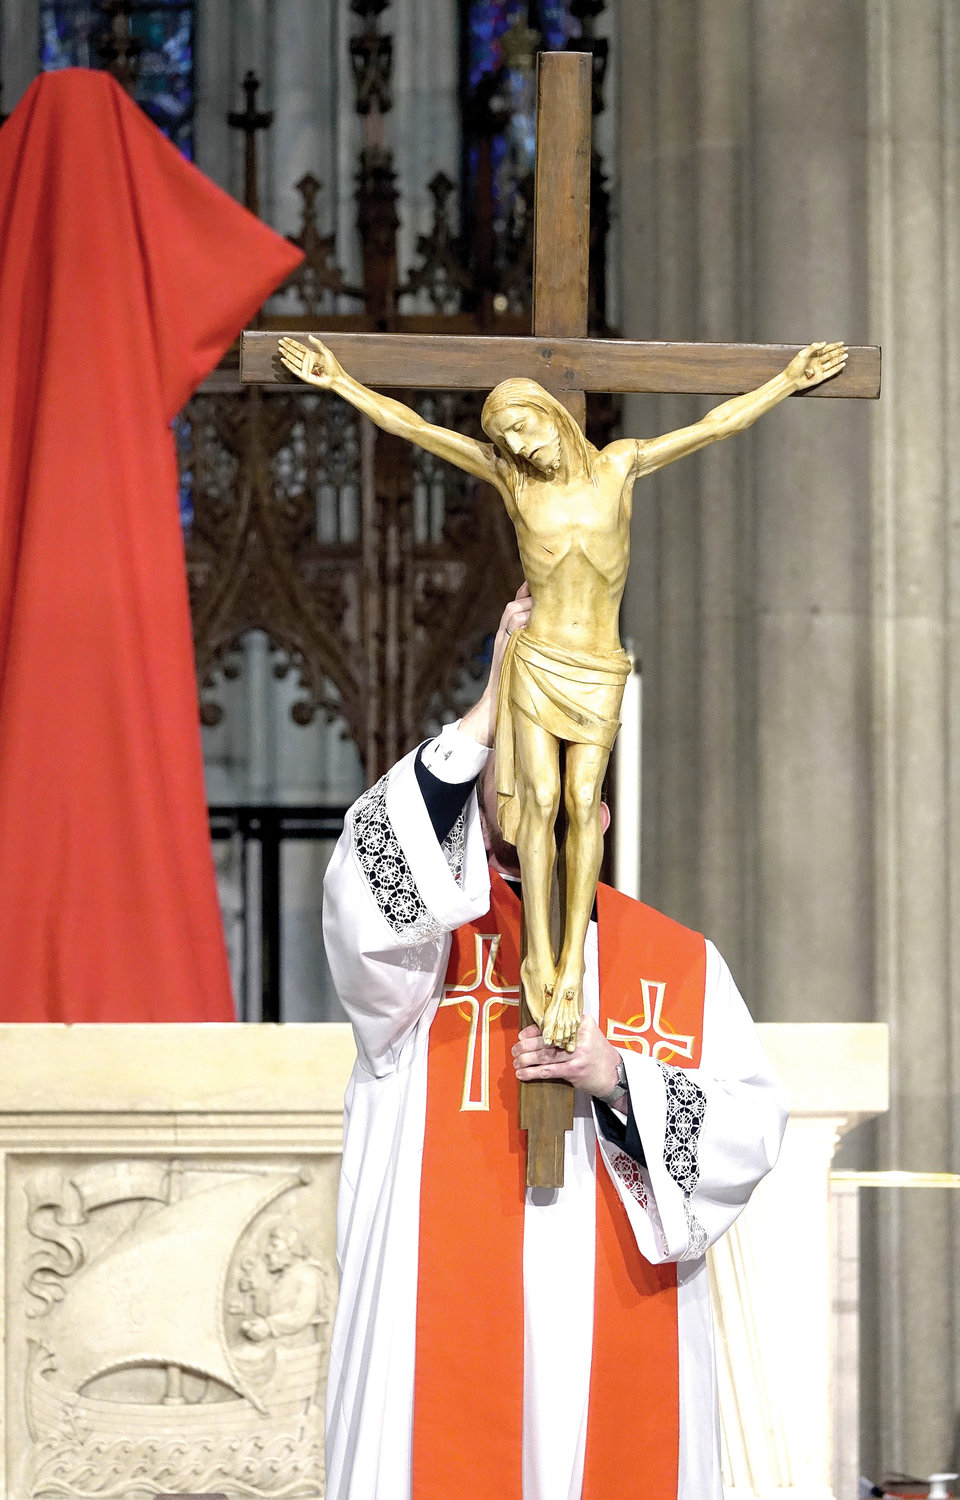 The Showing of the Holy Cross, during the Adoration of the Holy Cross, occurs after the Solemn Intercessions during the celebration of the Passion of the Lord.